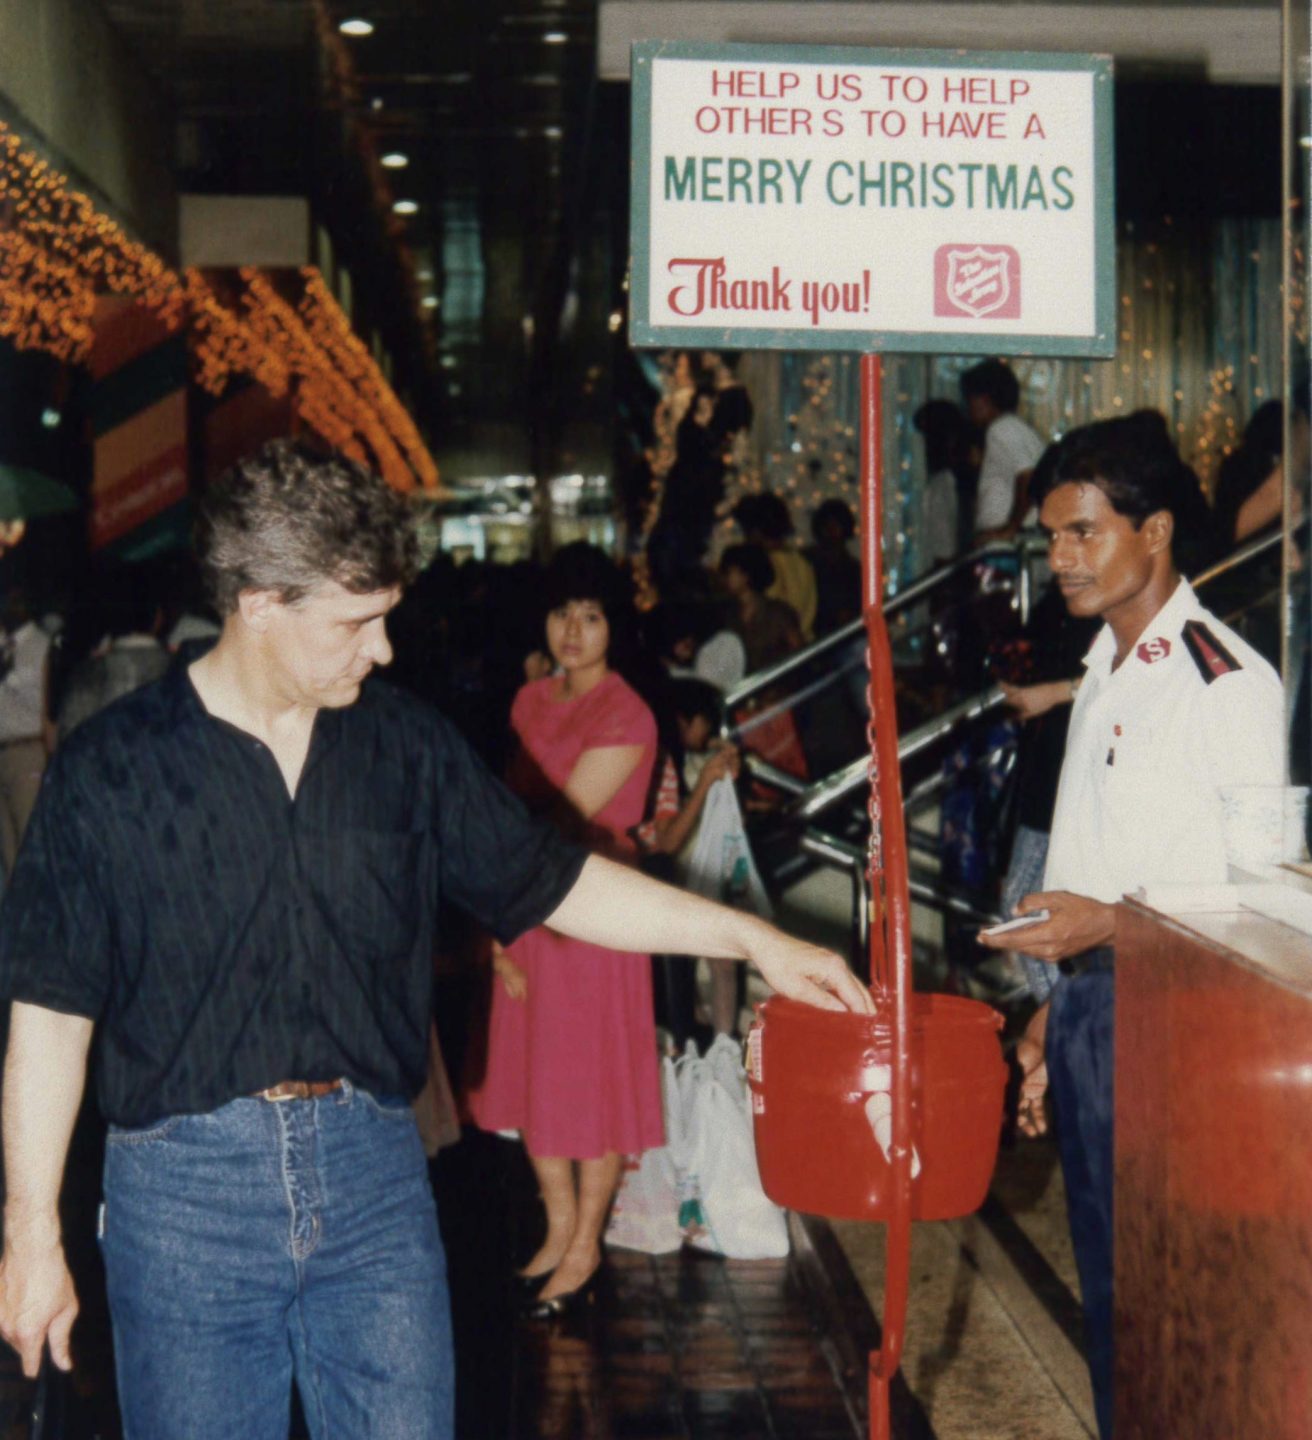 In his years manning the Christmas Kettles, P. Kunam (right) has had the chance to cross paths with many, who have been blessed by the Salvation Army's work with the community, returning to donate and bless others. Photo courtesy of the Salvation Army Singapore.